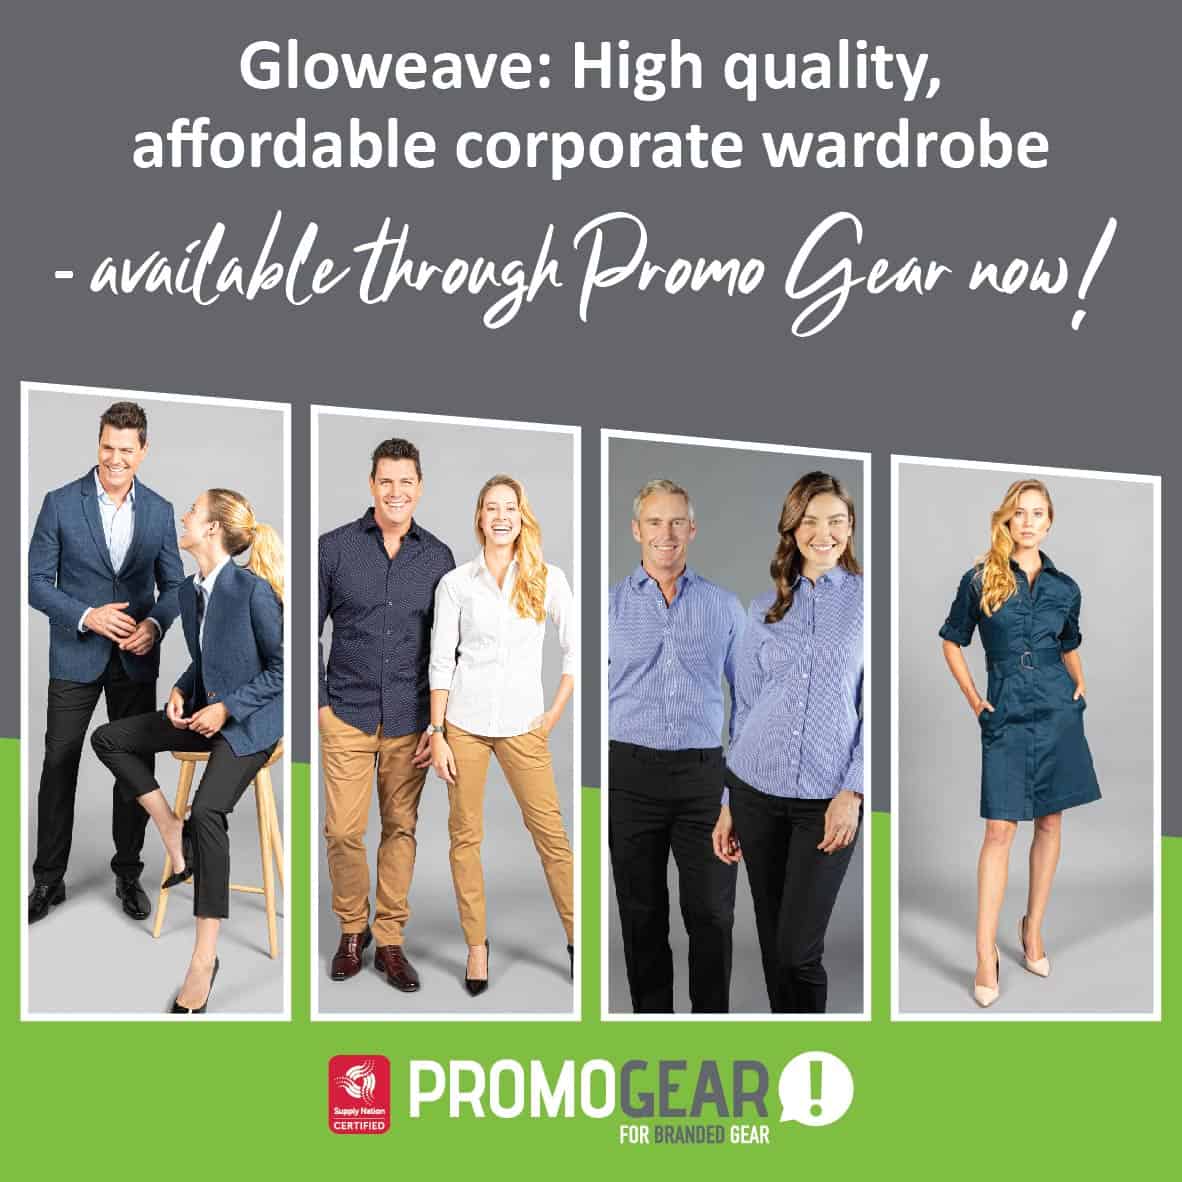 Gloweave promotional image with text